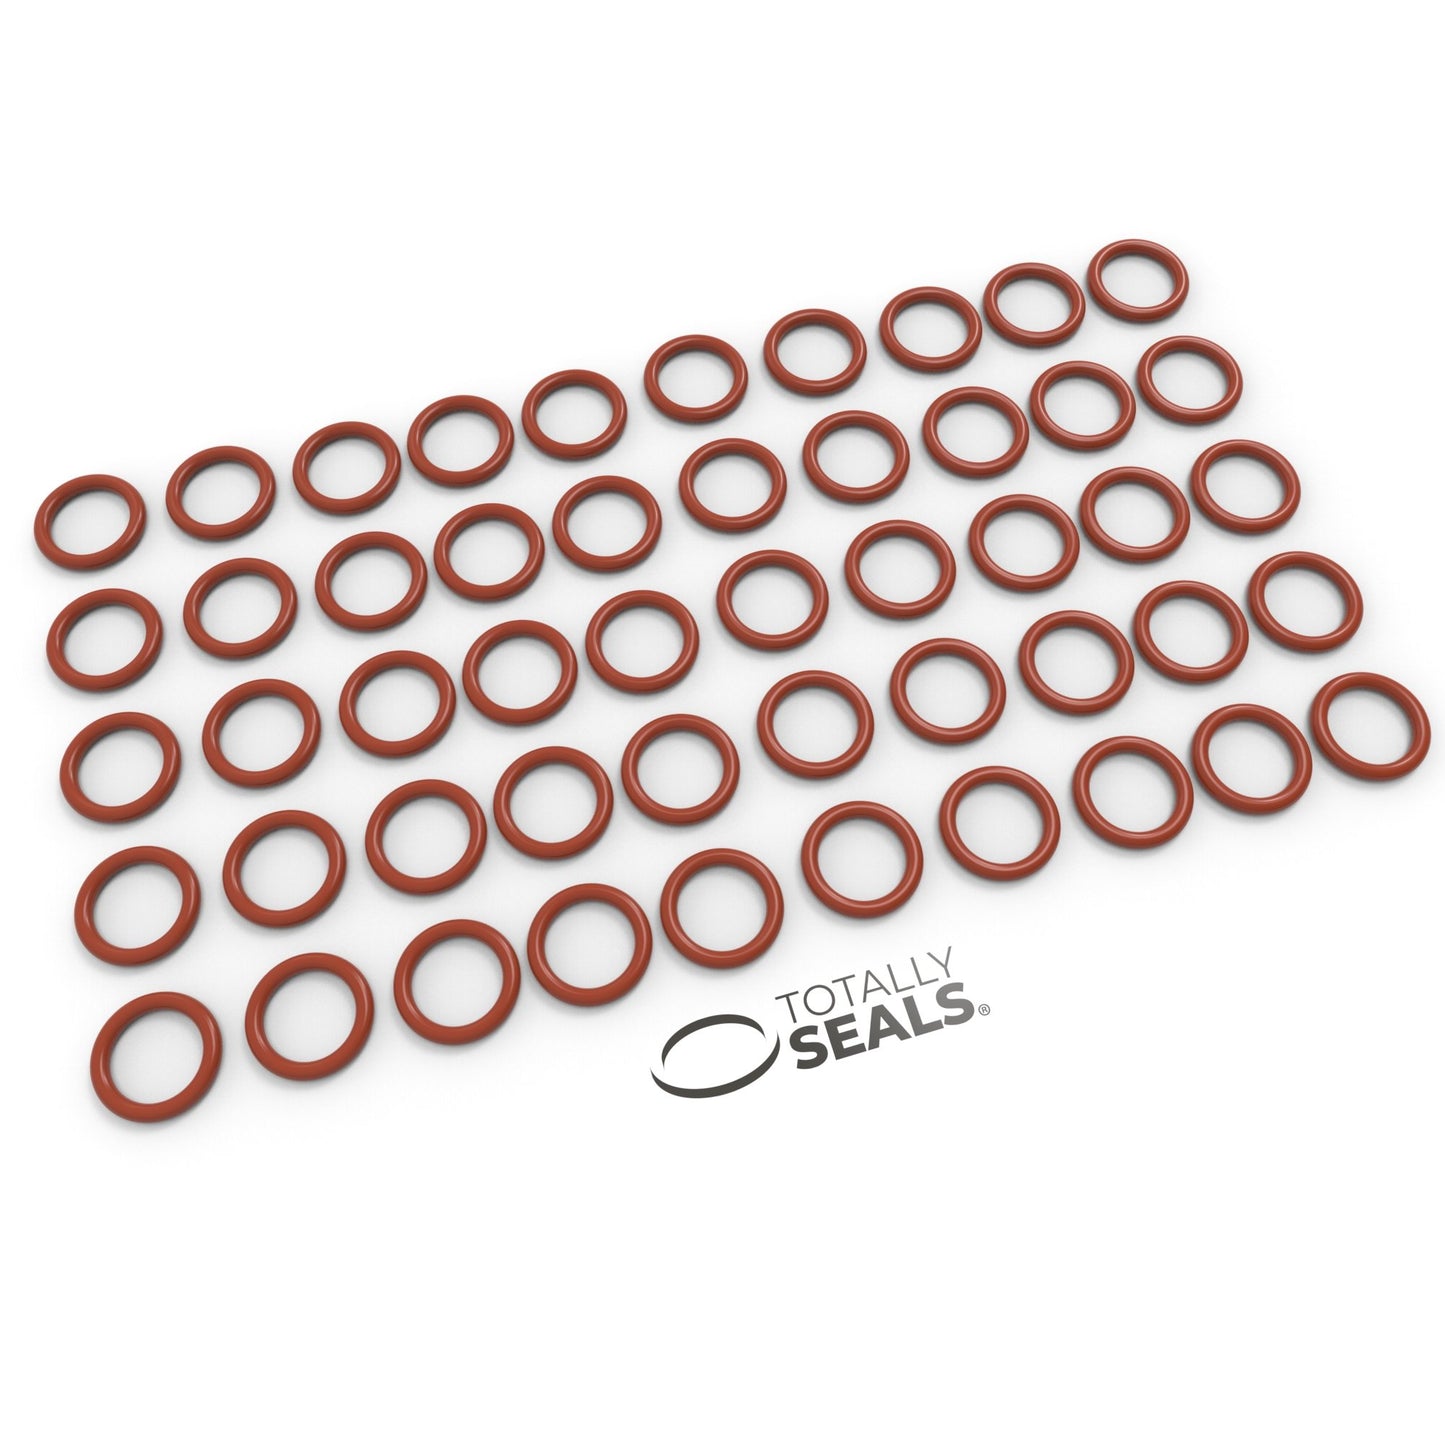 25mm x 3mm (31mm OD) Silicone O-Rings - Totally Seals®